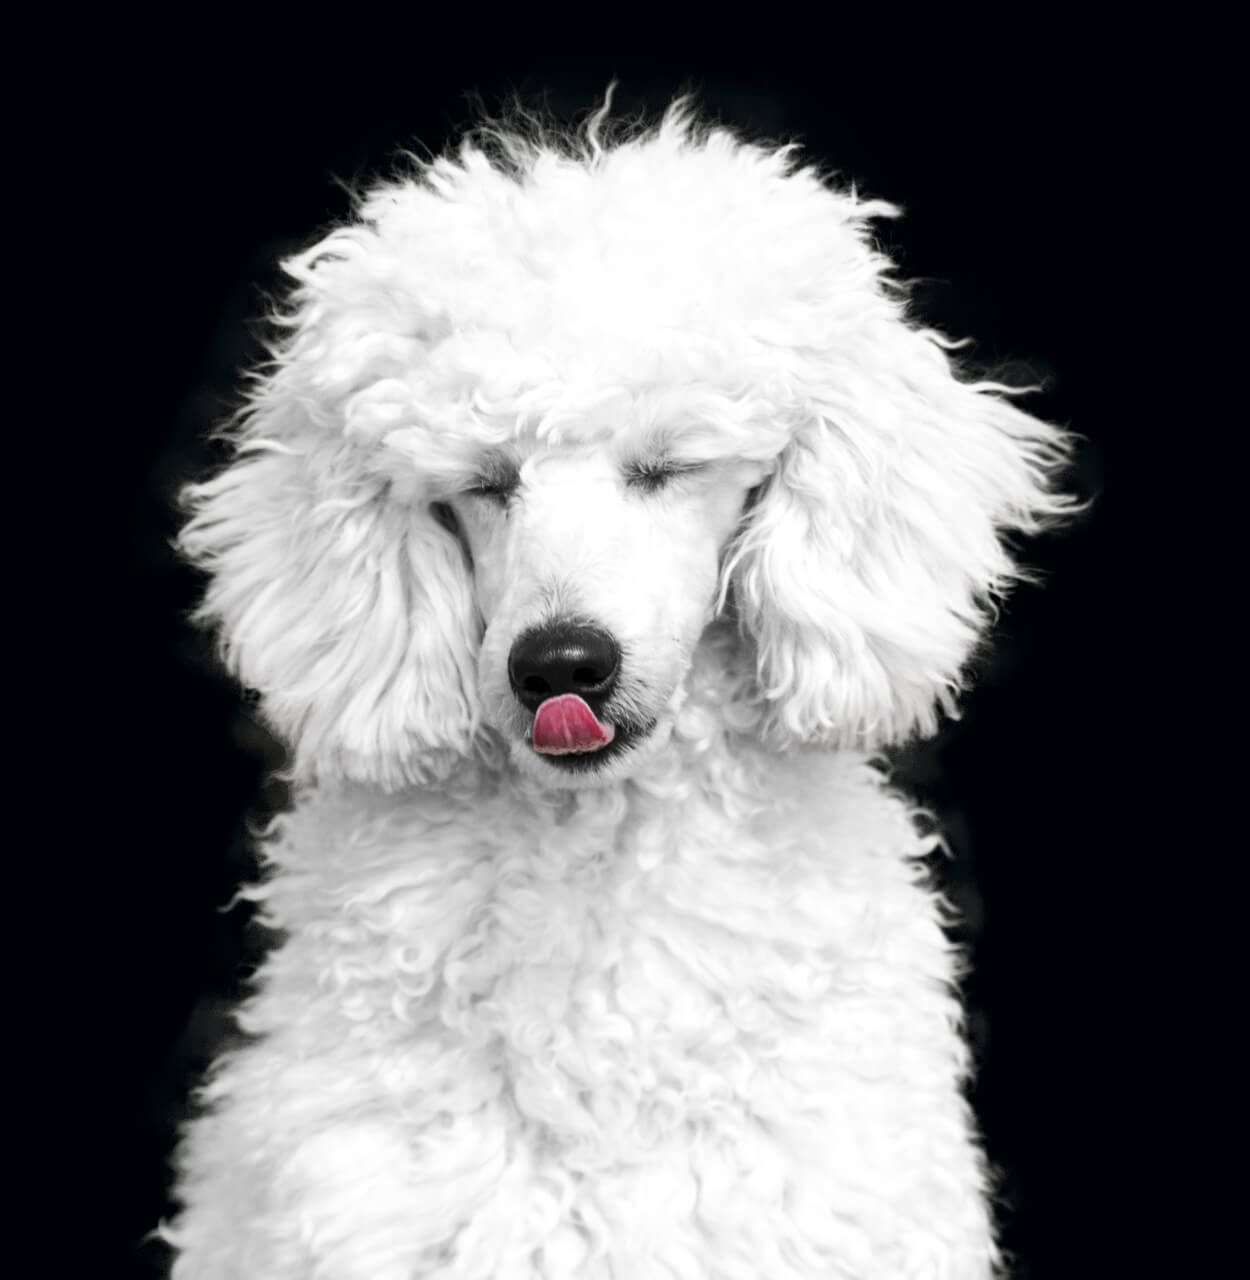 standard-poodle-licking-mouth-image-with-text-all-great-dog-collections